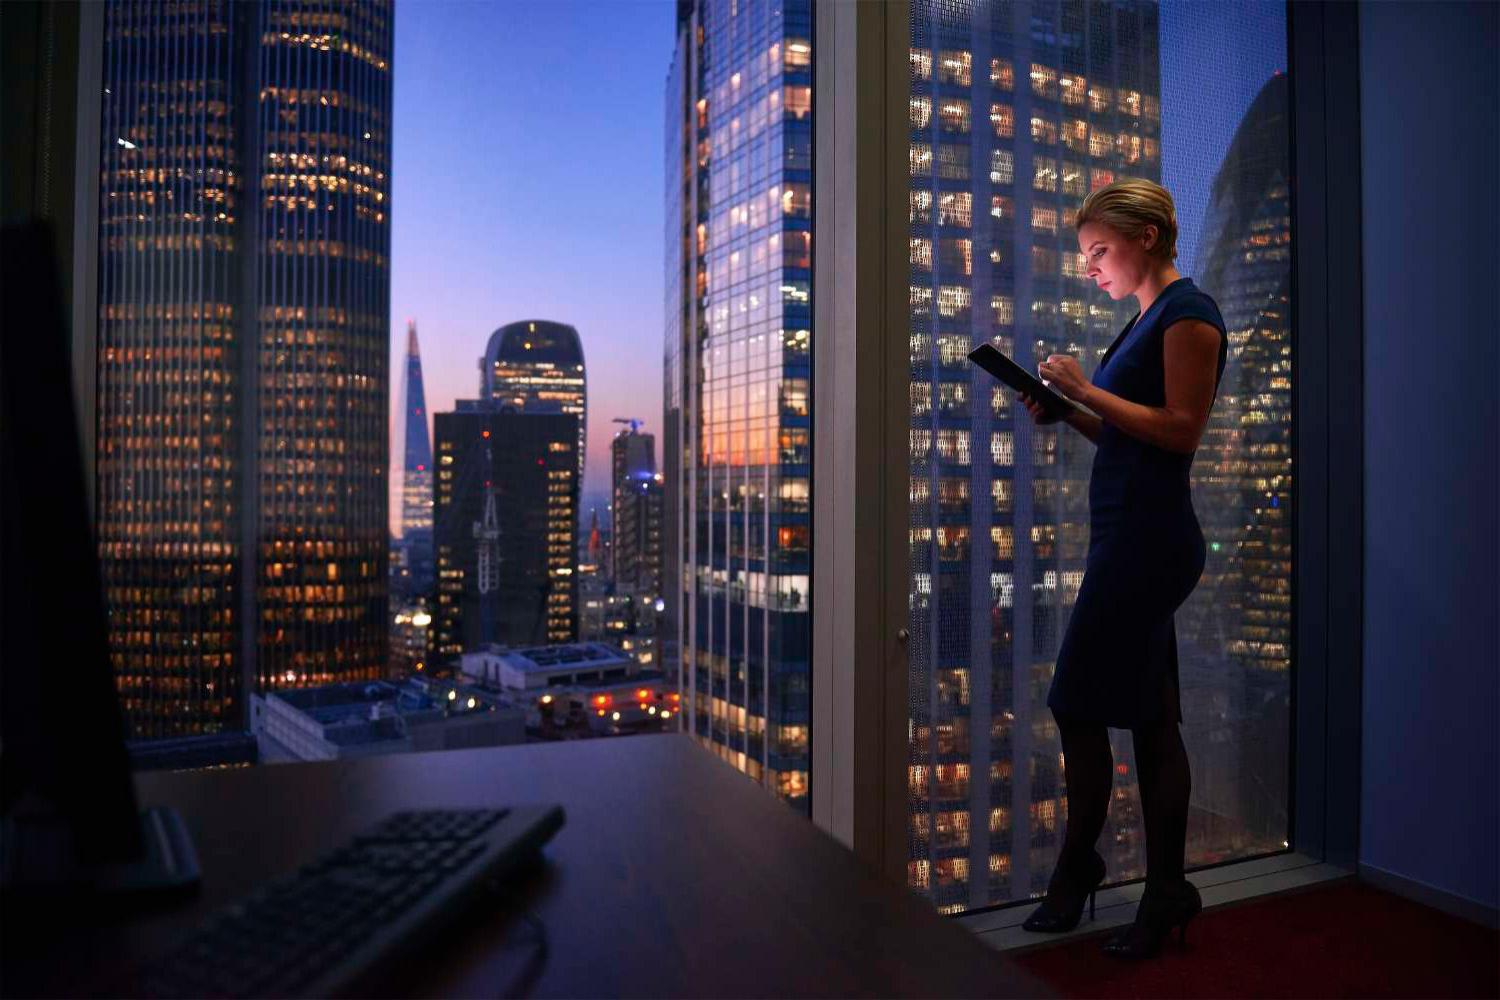 Blond woman on tablet in front of cityscape